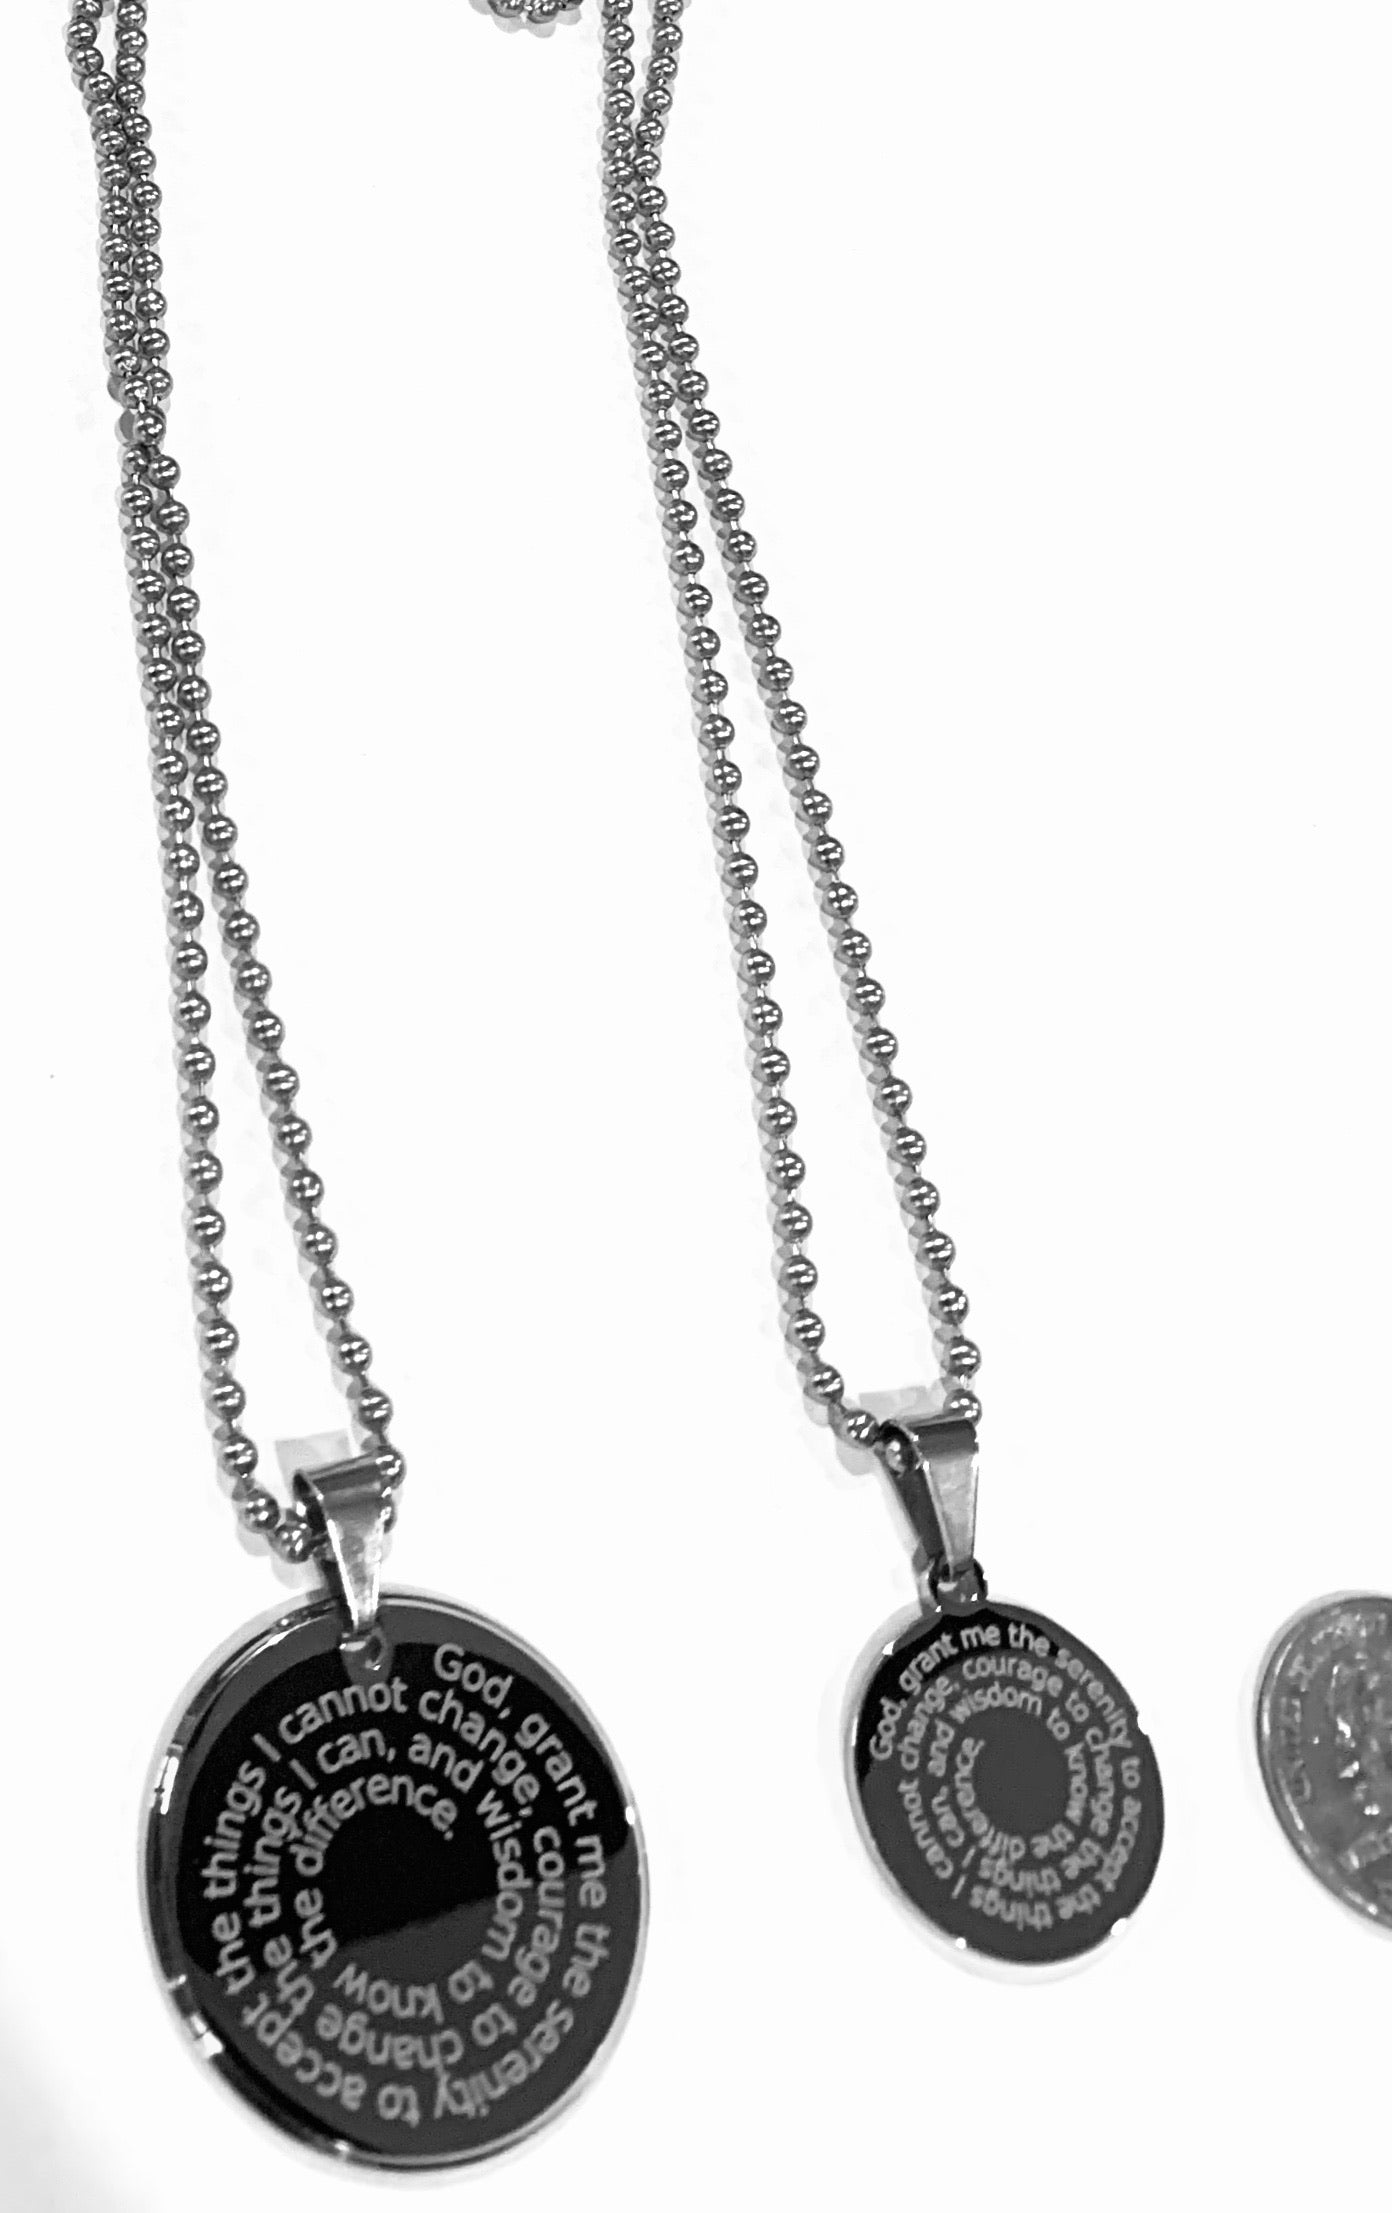 Serenity Prayer His and Hers Pendant Necklaces - Samstagsandmore